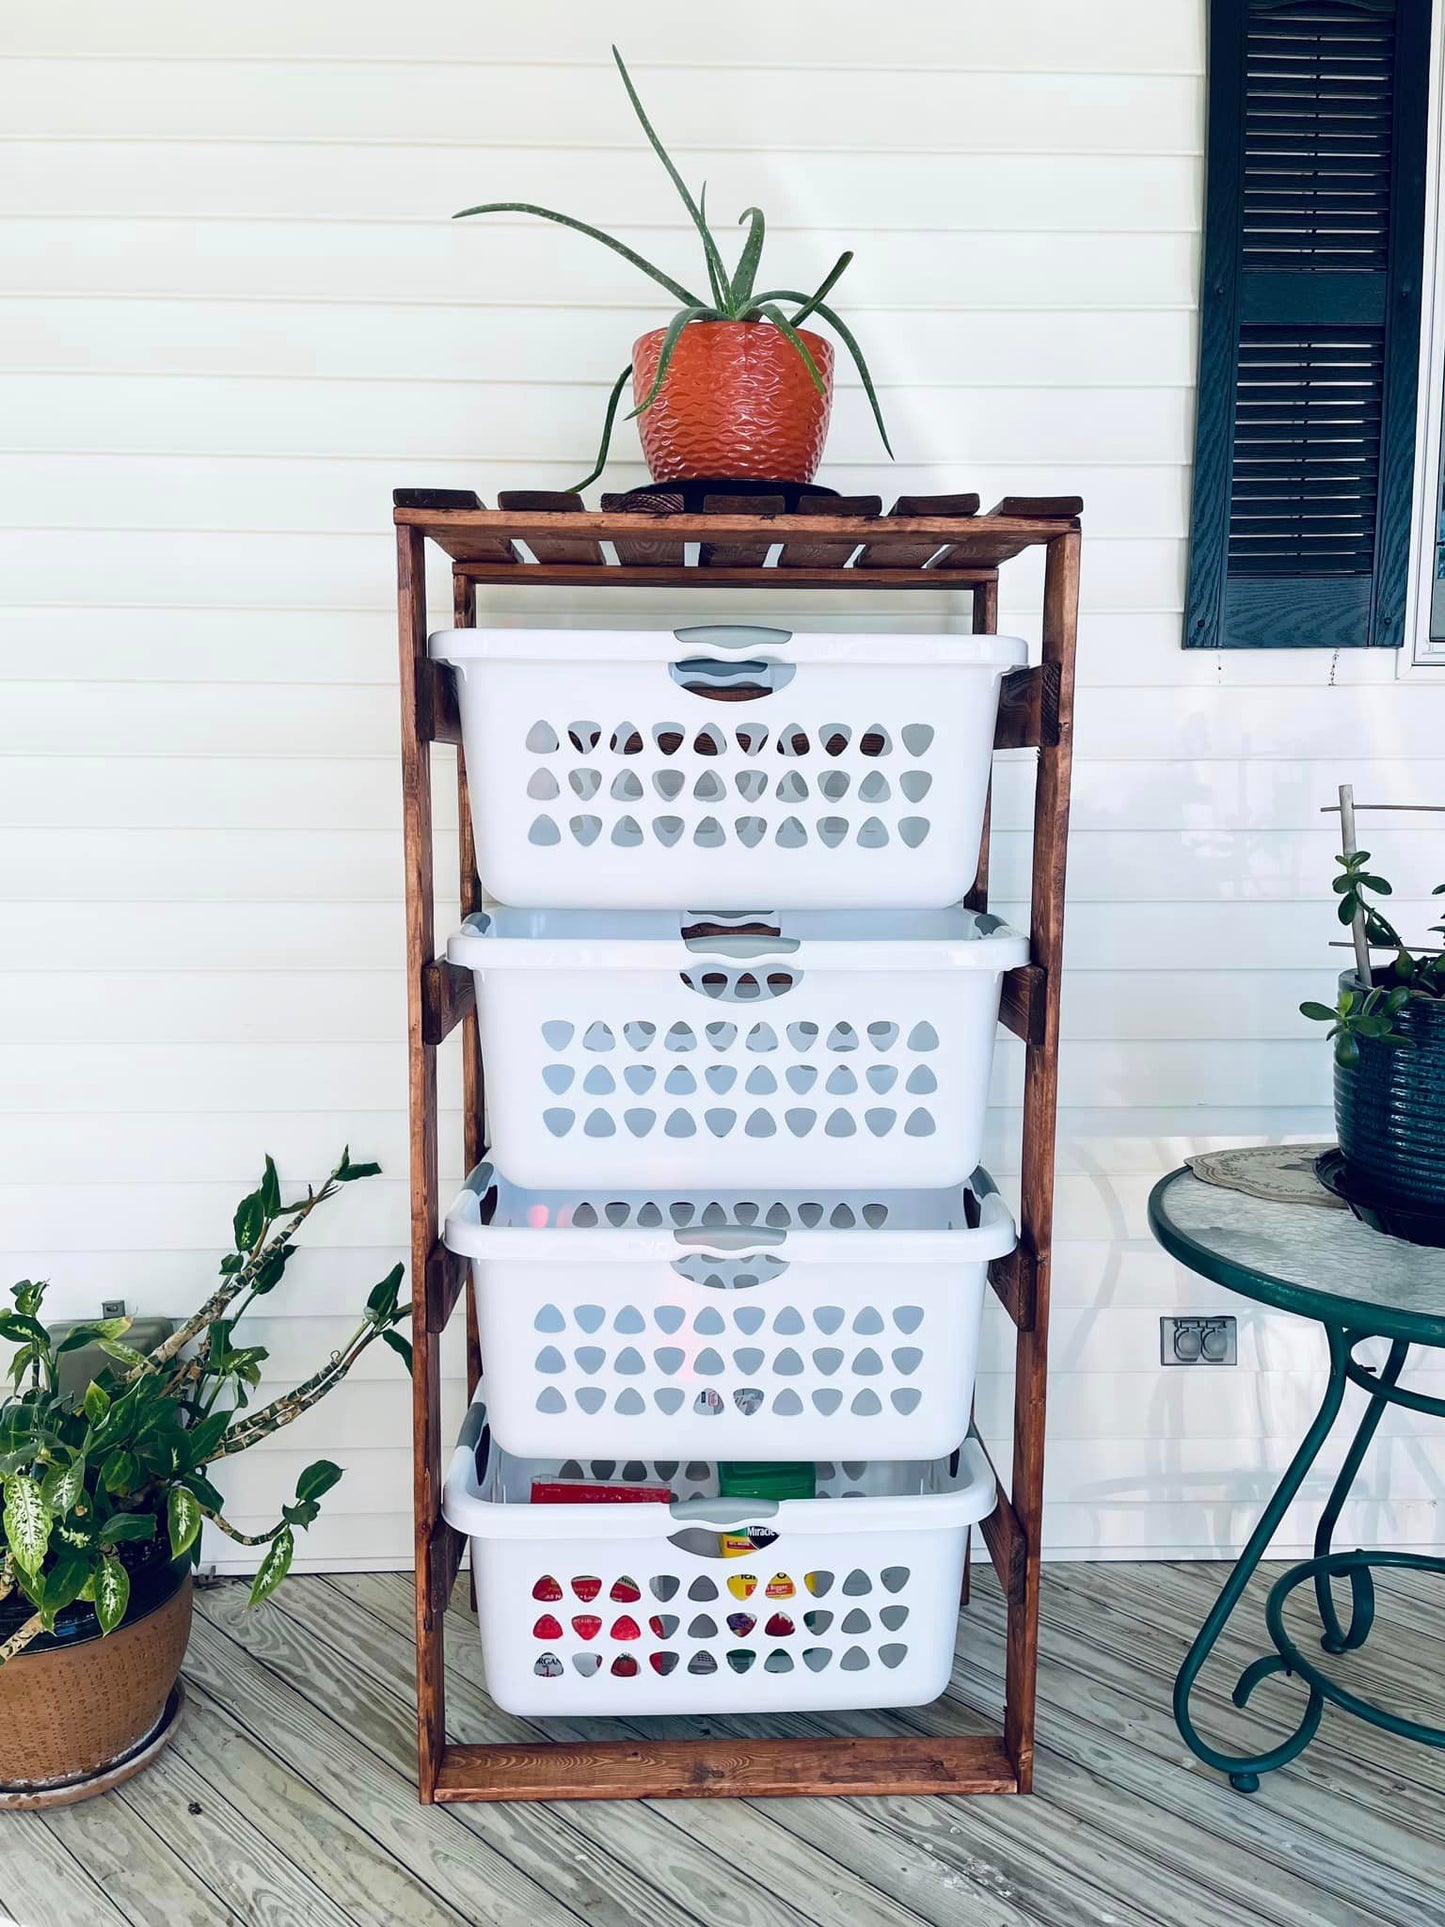 My wife saw it on Instagram and wanted me to make itintroducing my 4  tier laundry basket organizer. : r/woodworking